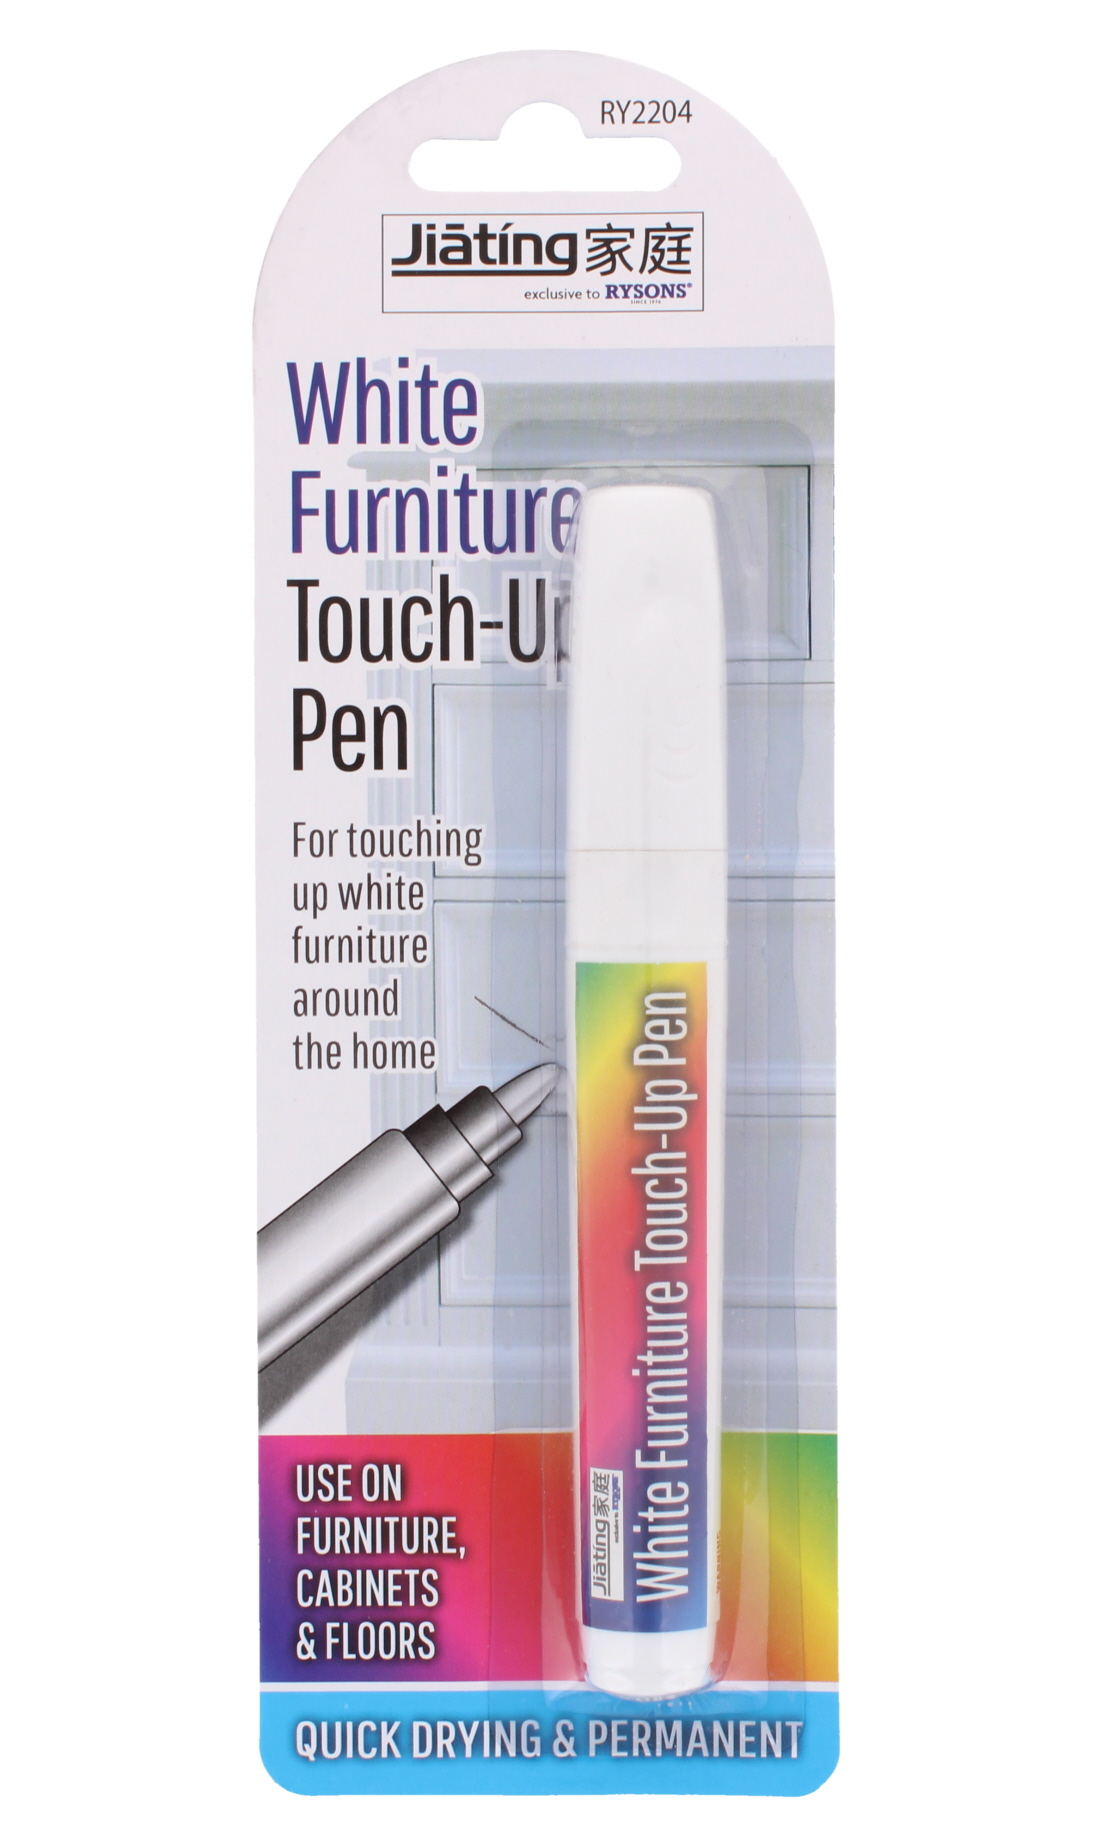 Wholesale White Furniture Touch-Up Pen